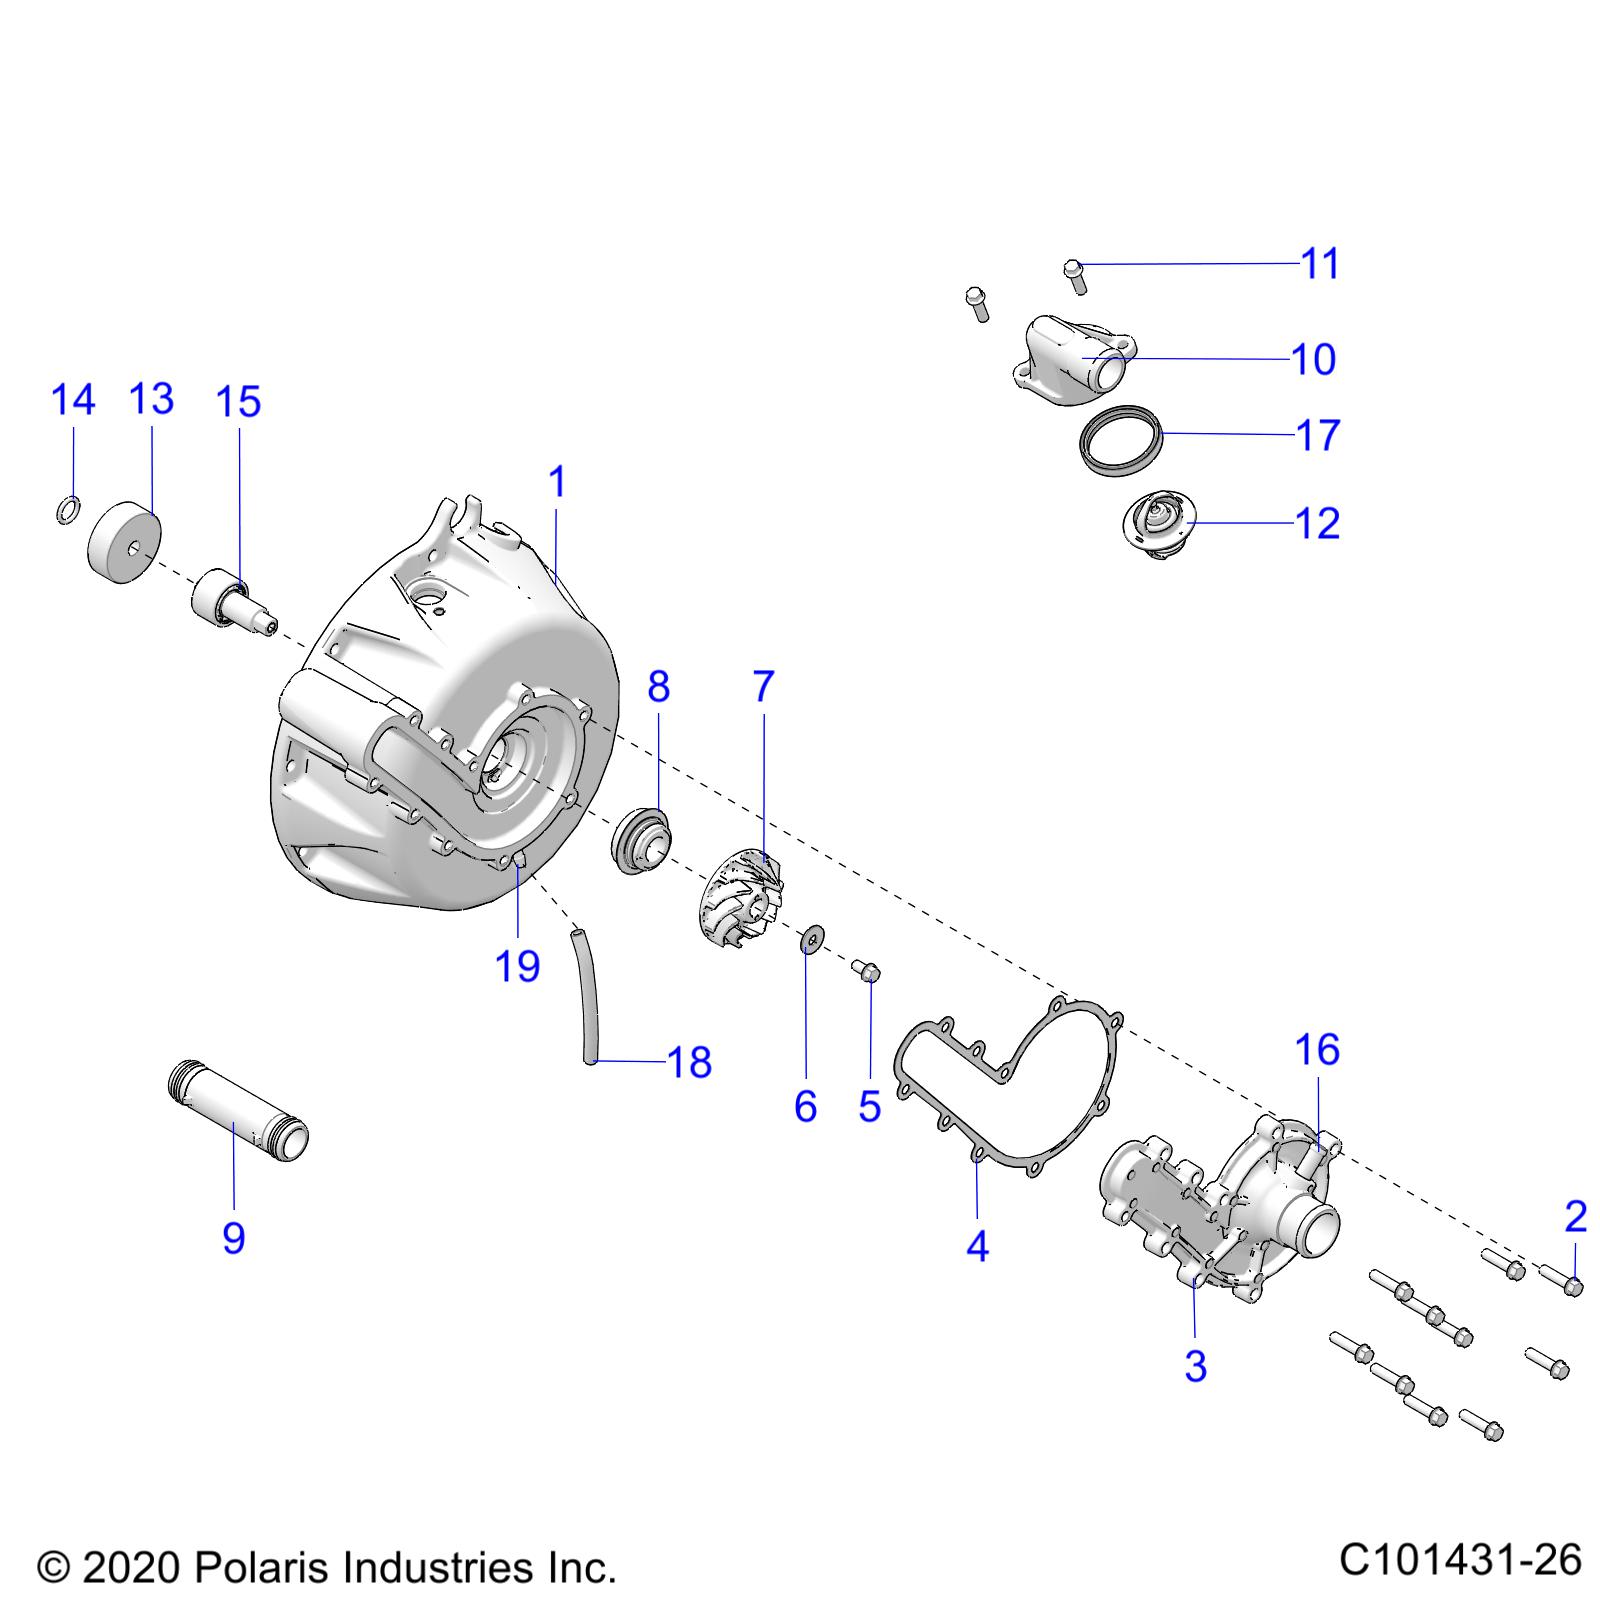 ENGINE, COOLING SYSTEM and WATER PUMP - A20SYE95AD/CAD (C101431-26)